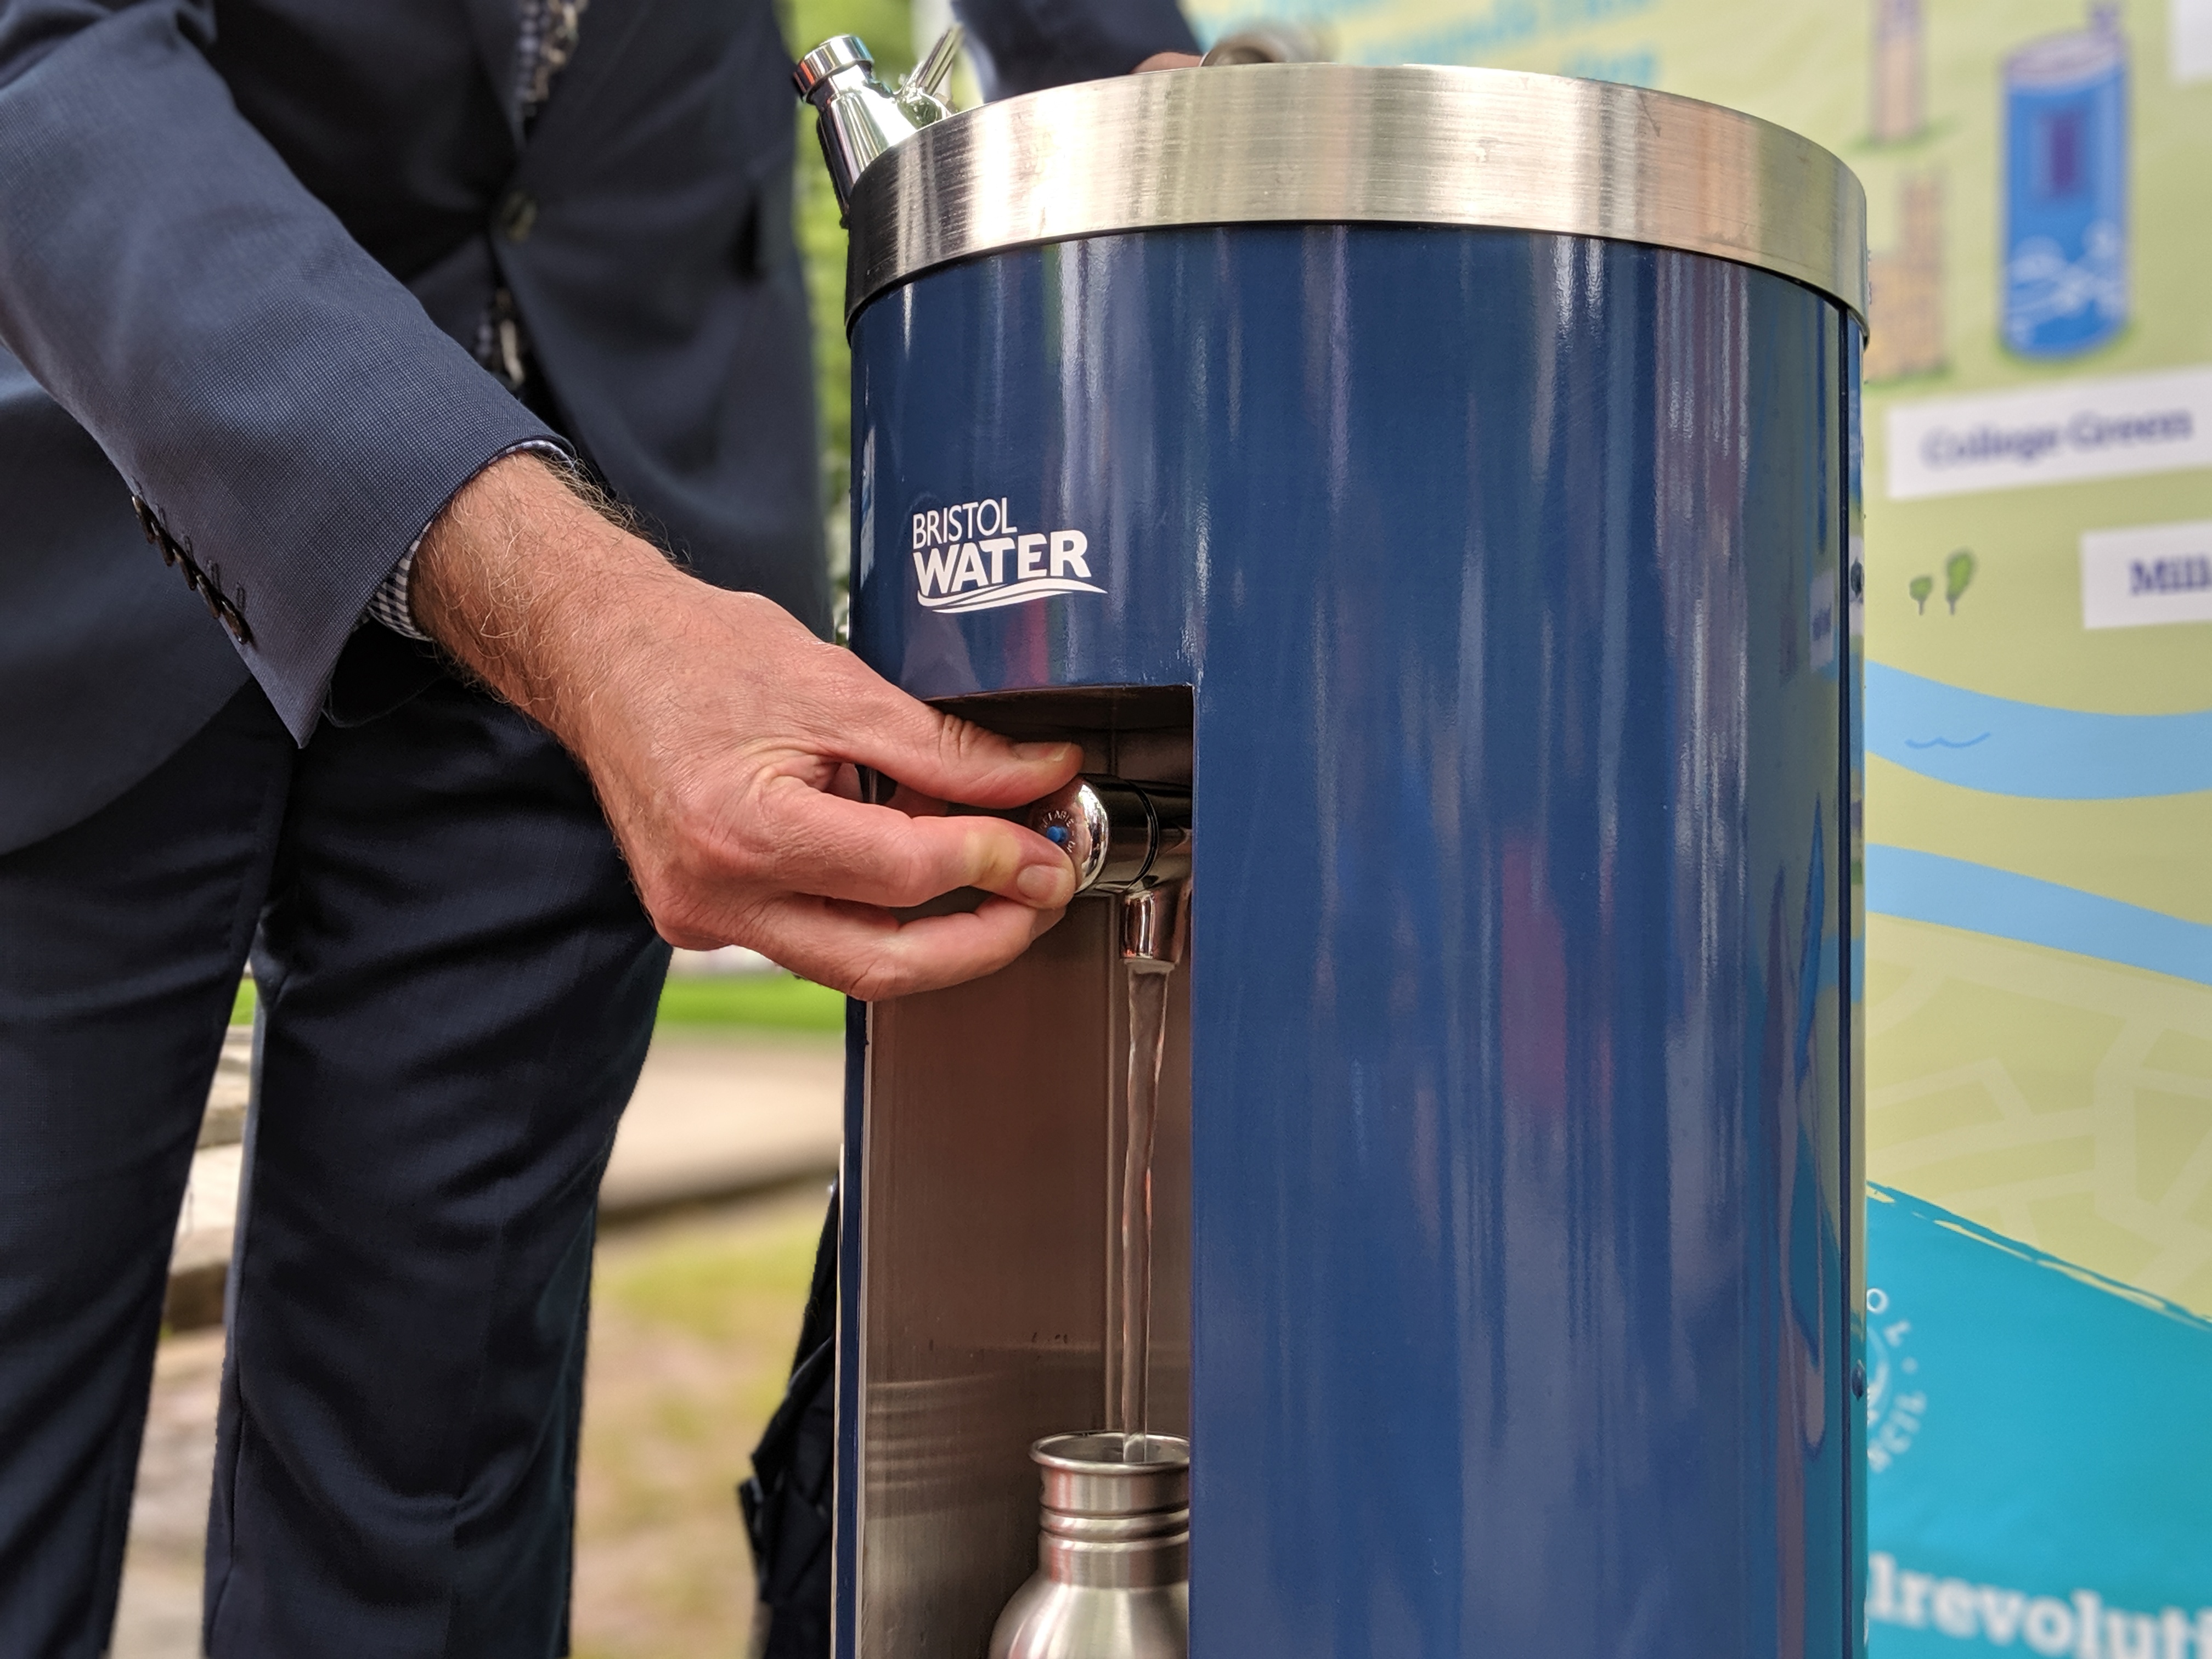 Man refilling a metal water bottle from a Bristol Water fountain